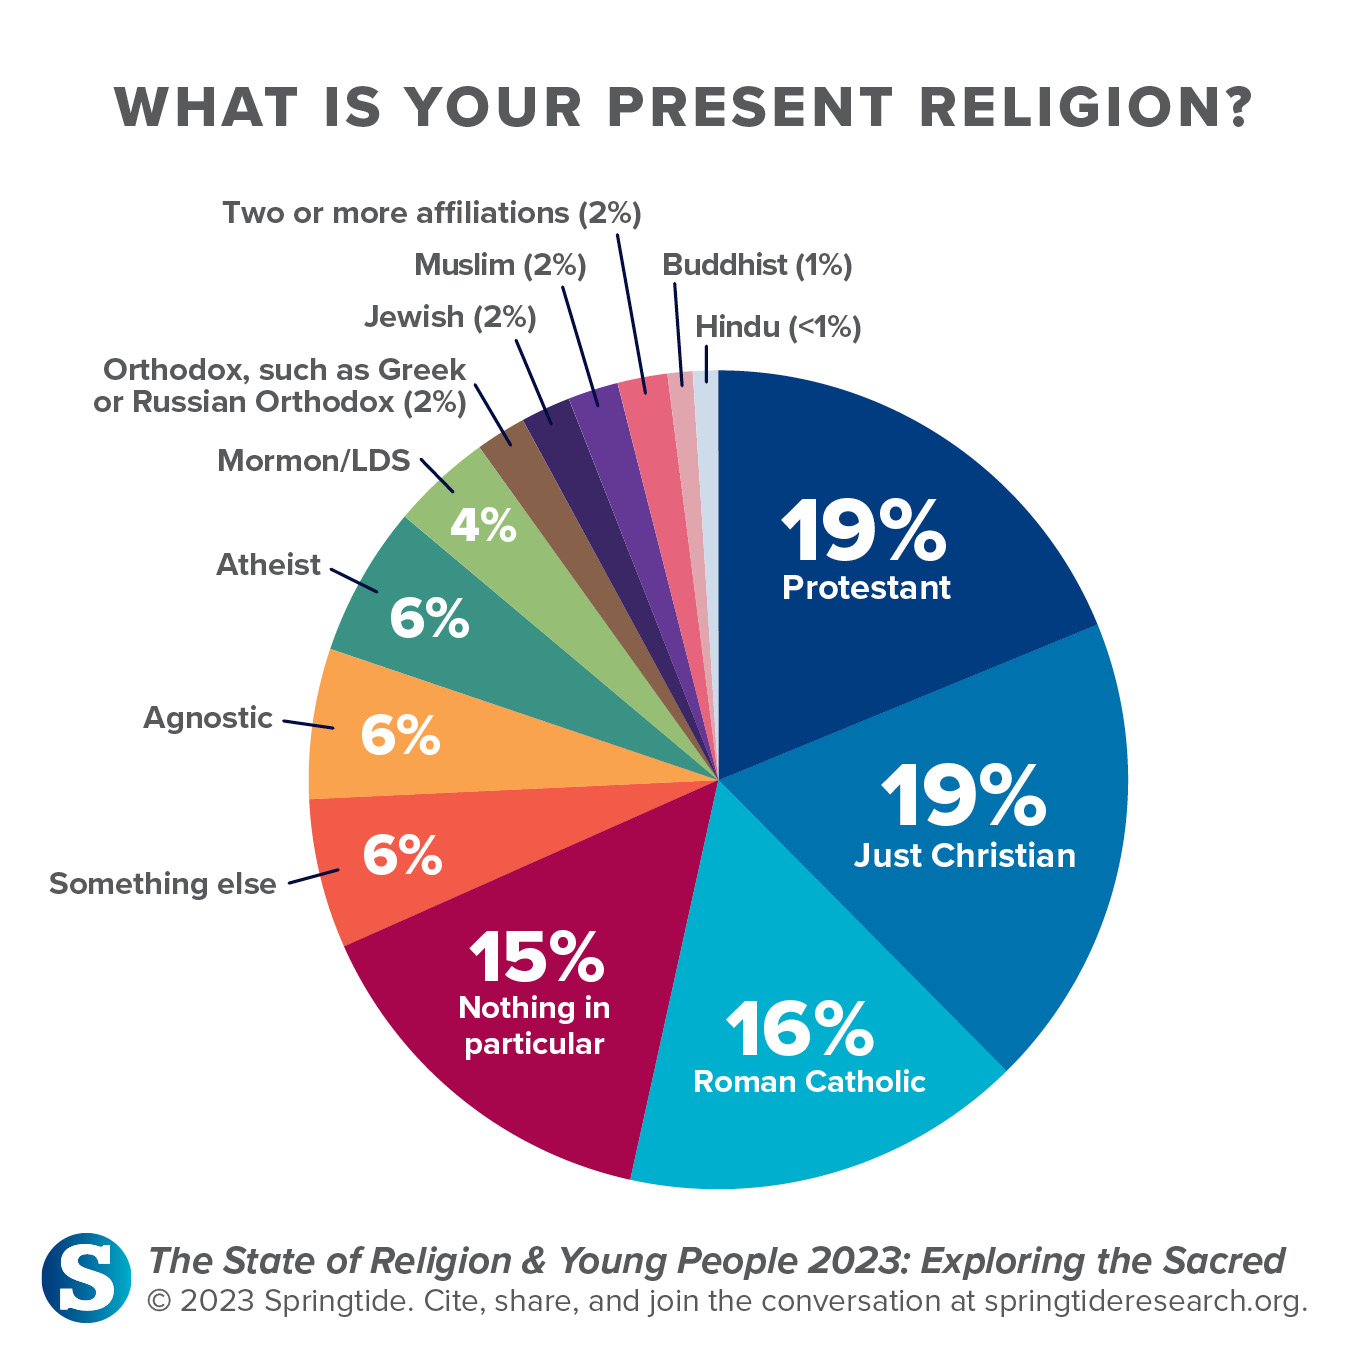 "What is your present religion?" (Graphic courtesy Springtide)